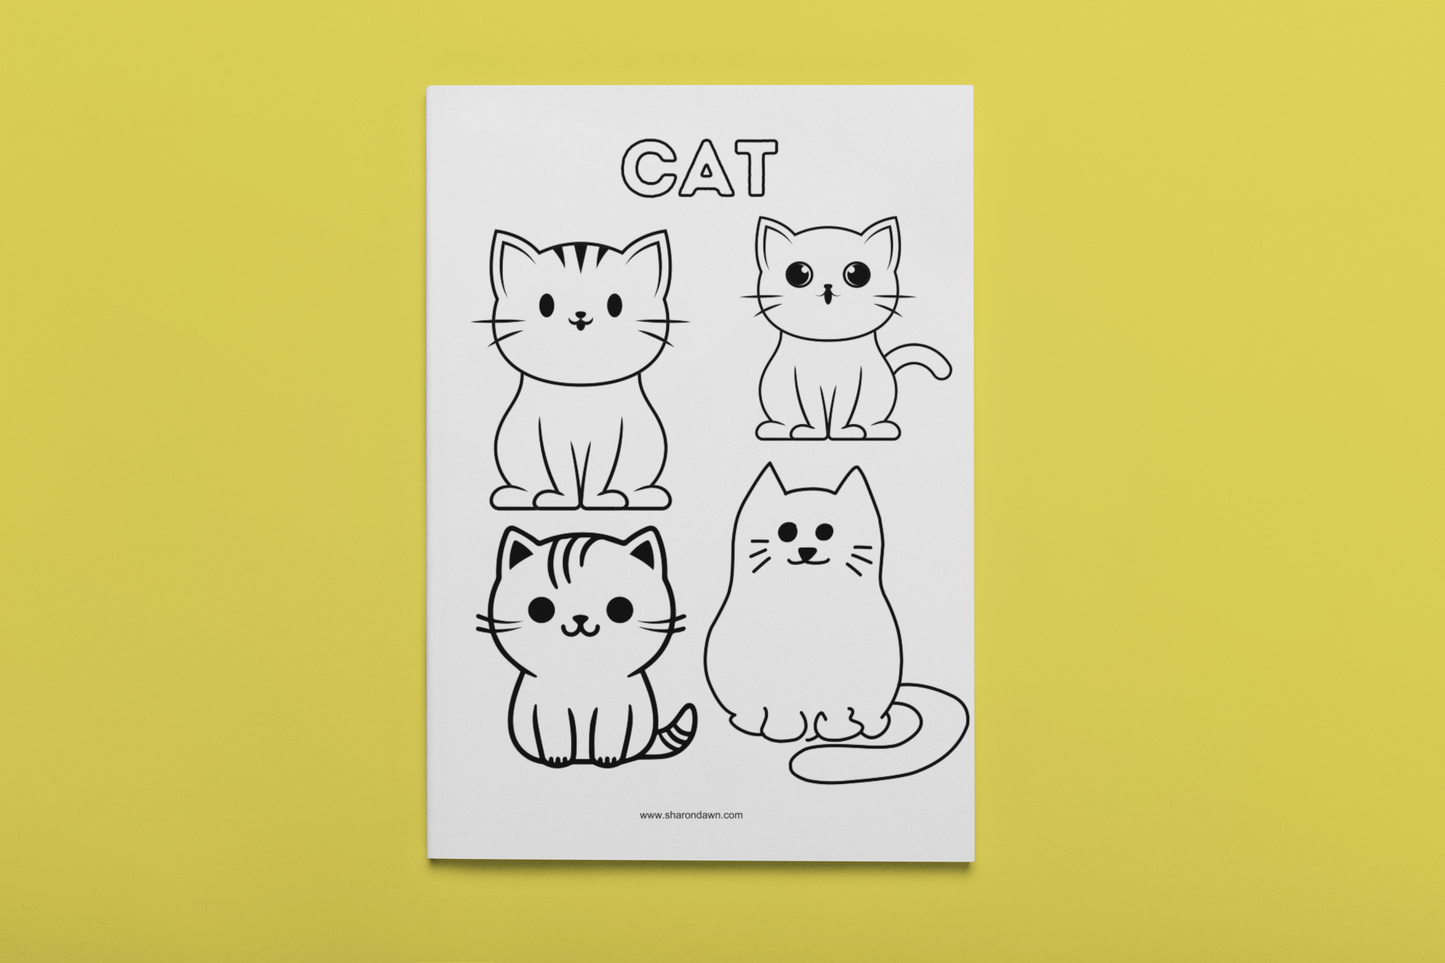 Cat - Colouring Sheet - Printable Digital Download ~ Sharon Dawn Collection